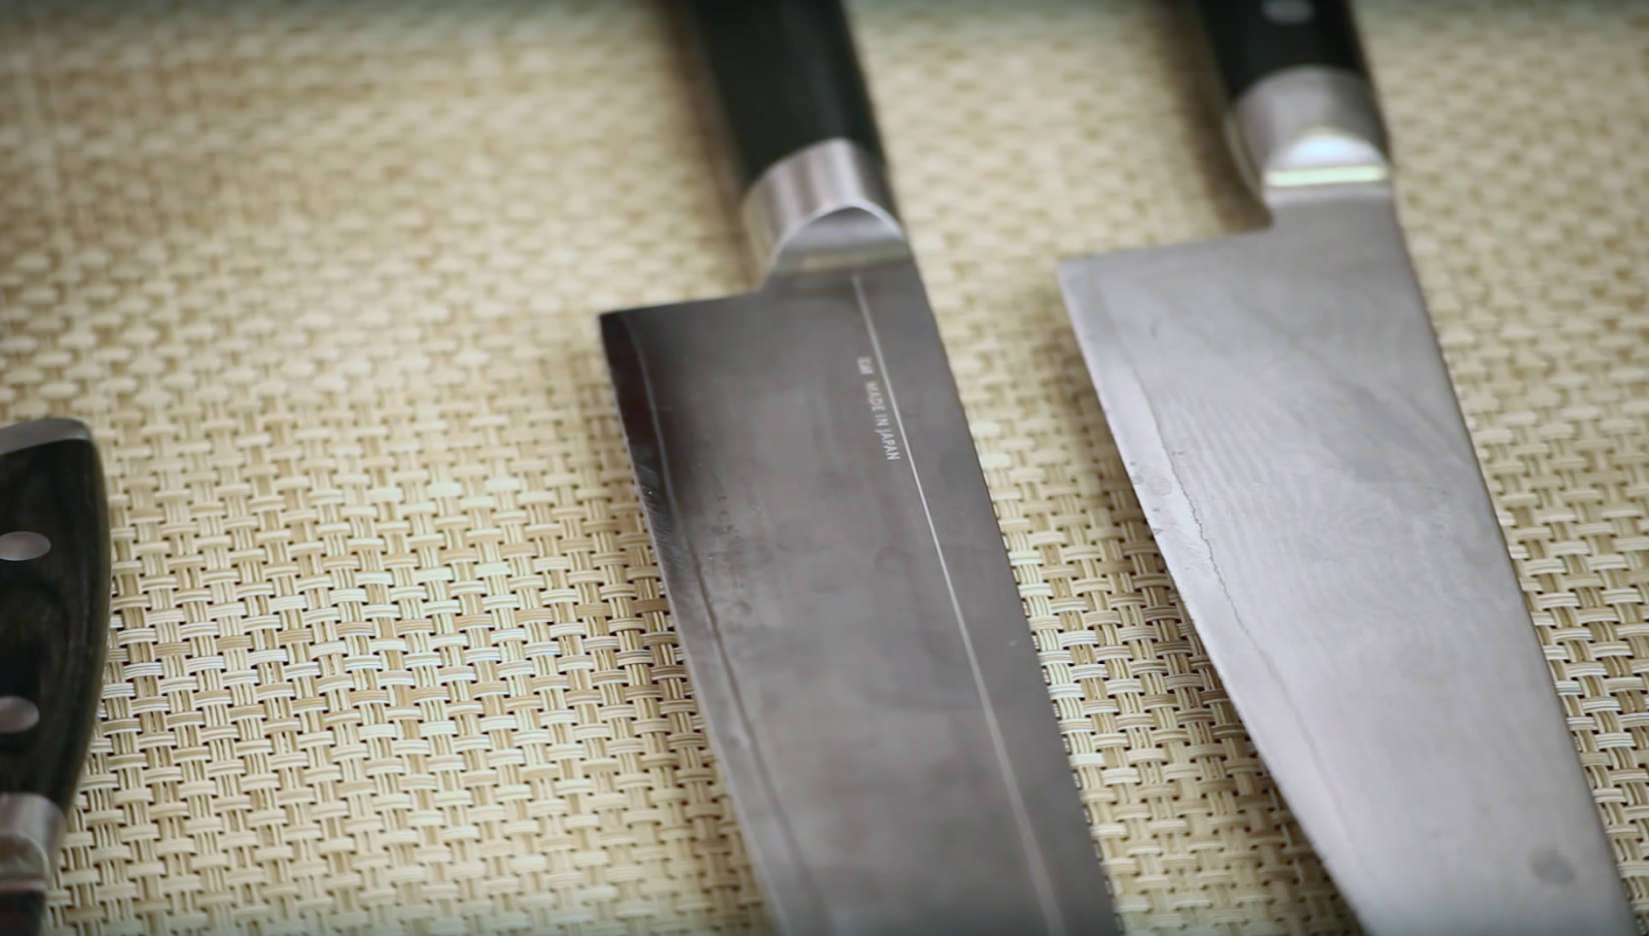 The 9 Best Chef's Knives According to Chris - Chris Loves Julia